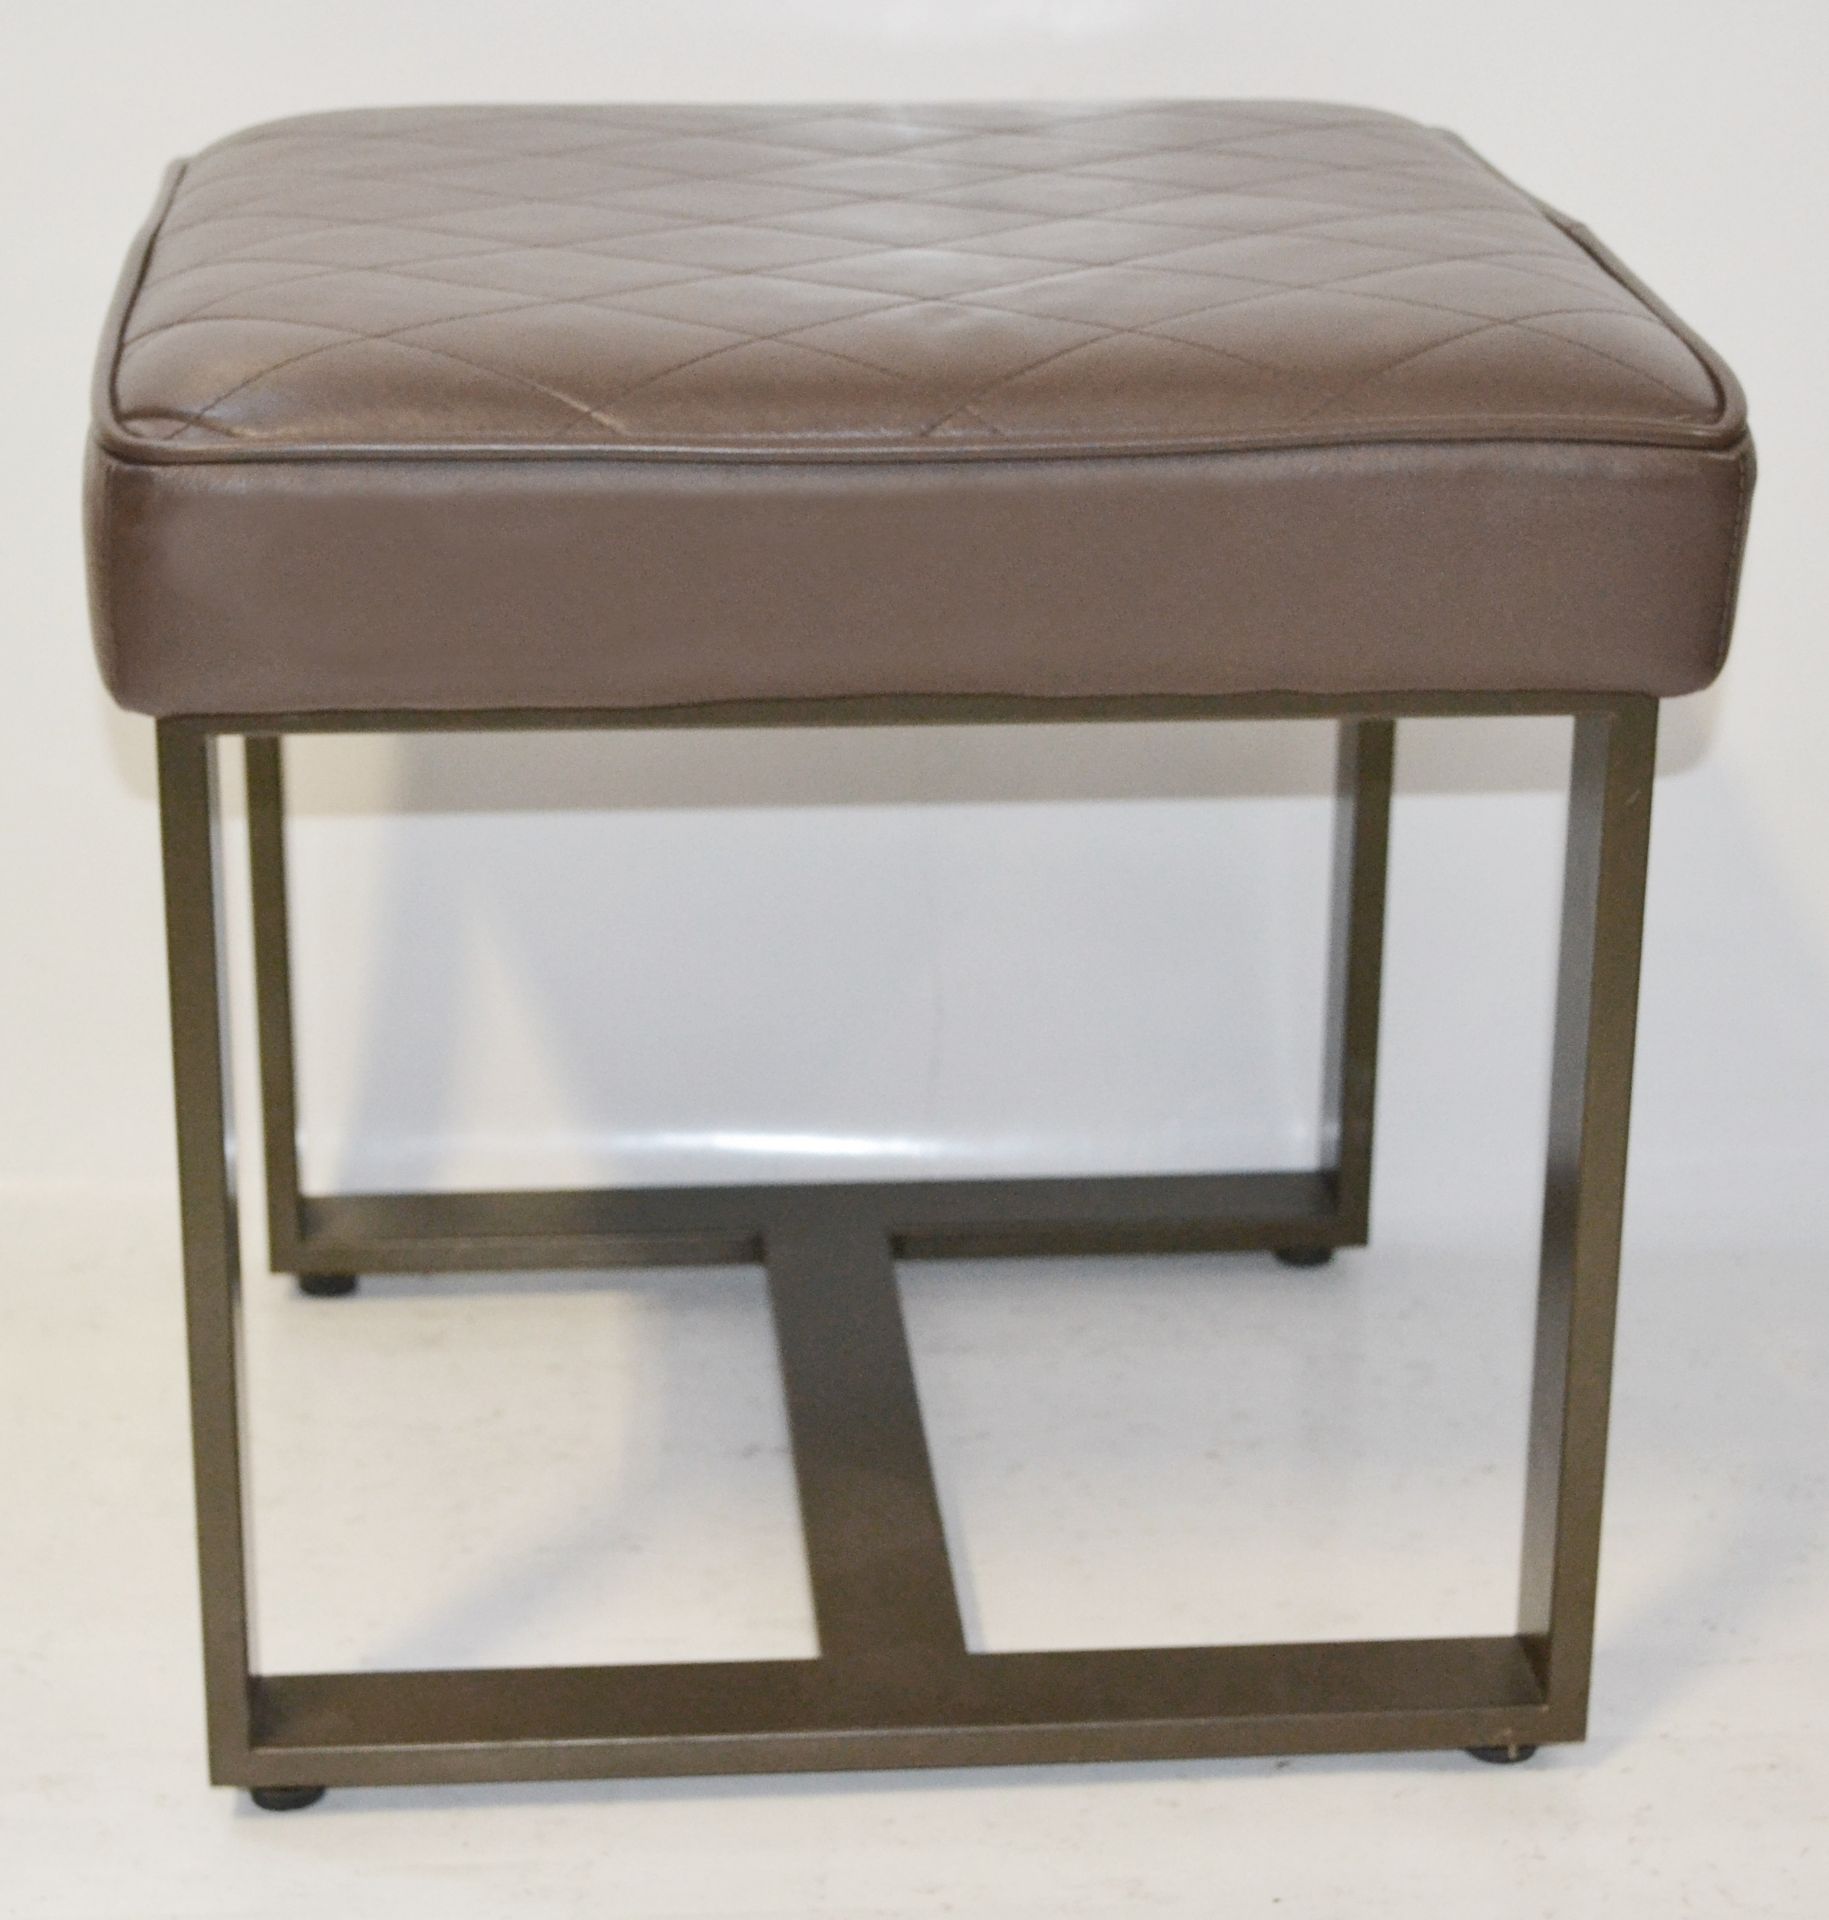 Pair Of Upholstered Stools In A Brown Faux Leather - Recently Removed From A Major UK Store In